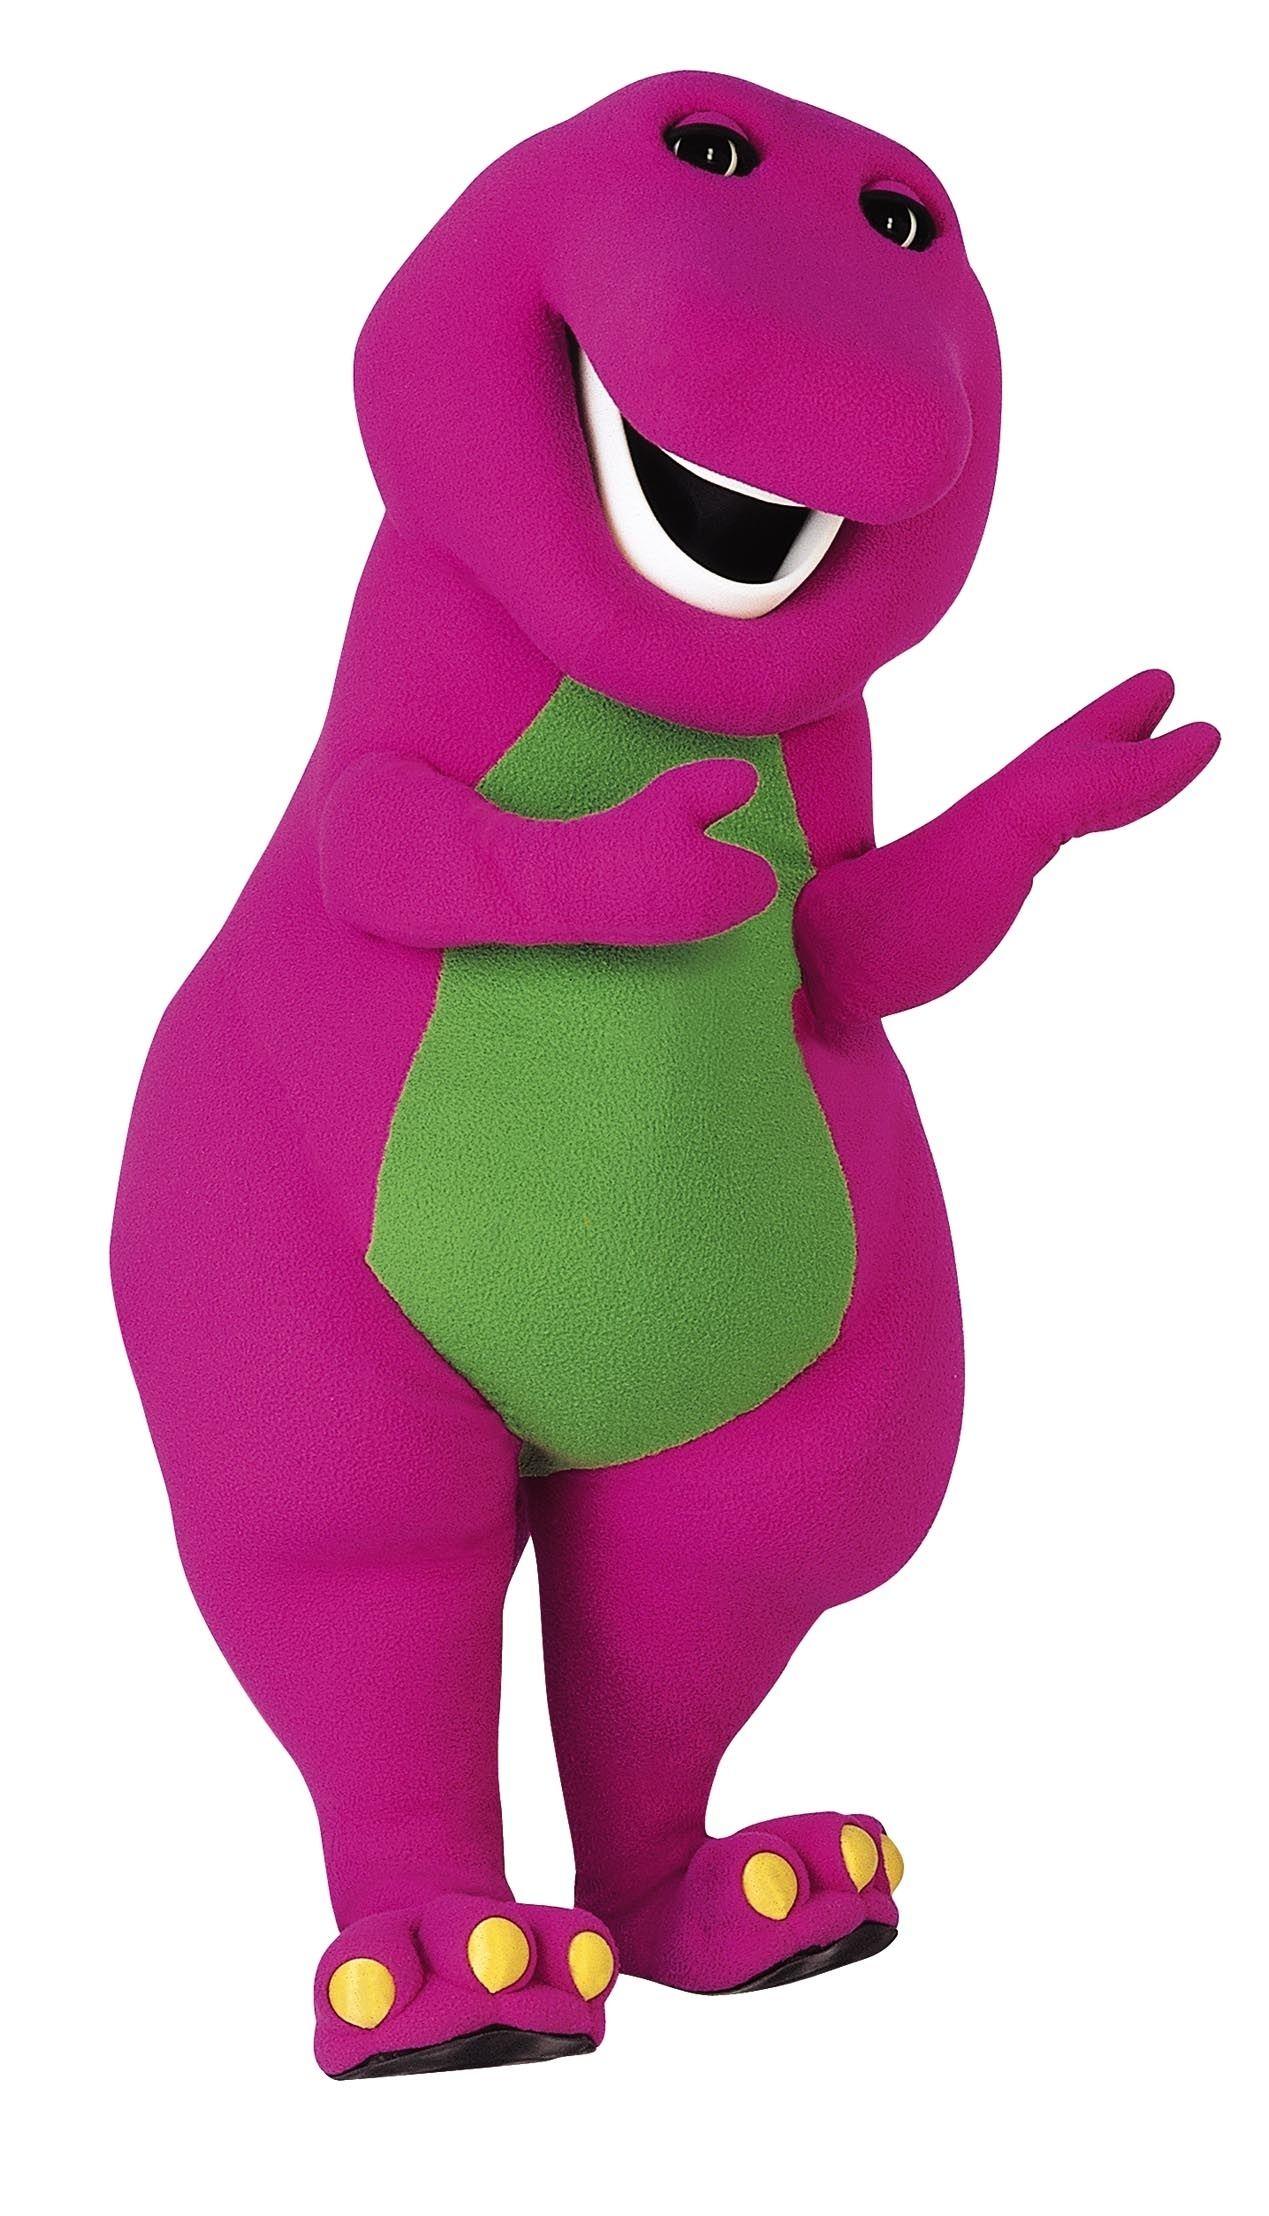 Barney And Friends Clipart.com. Free for personal